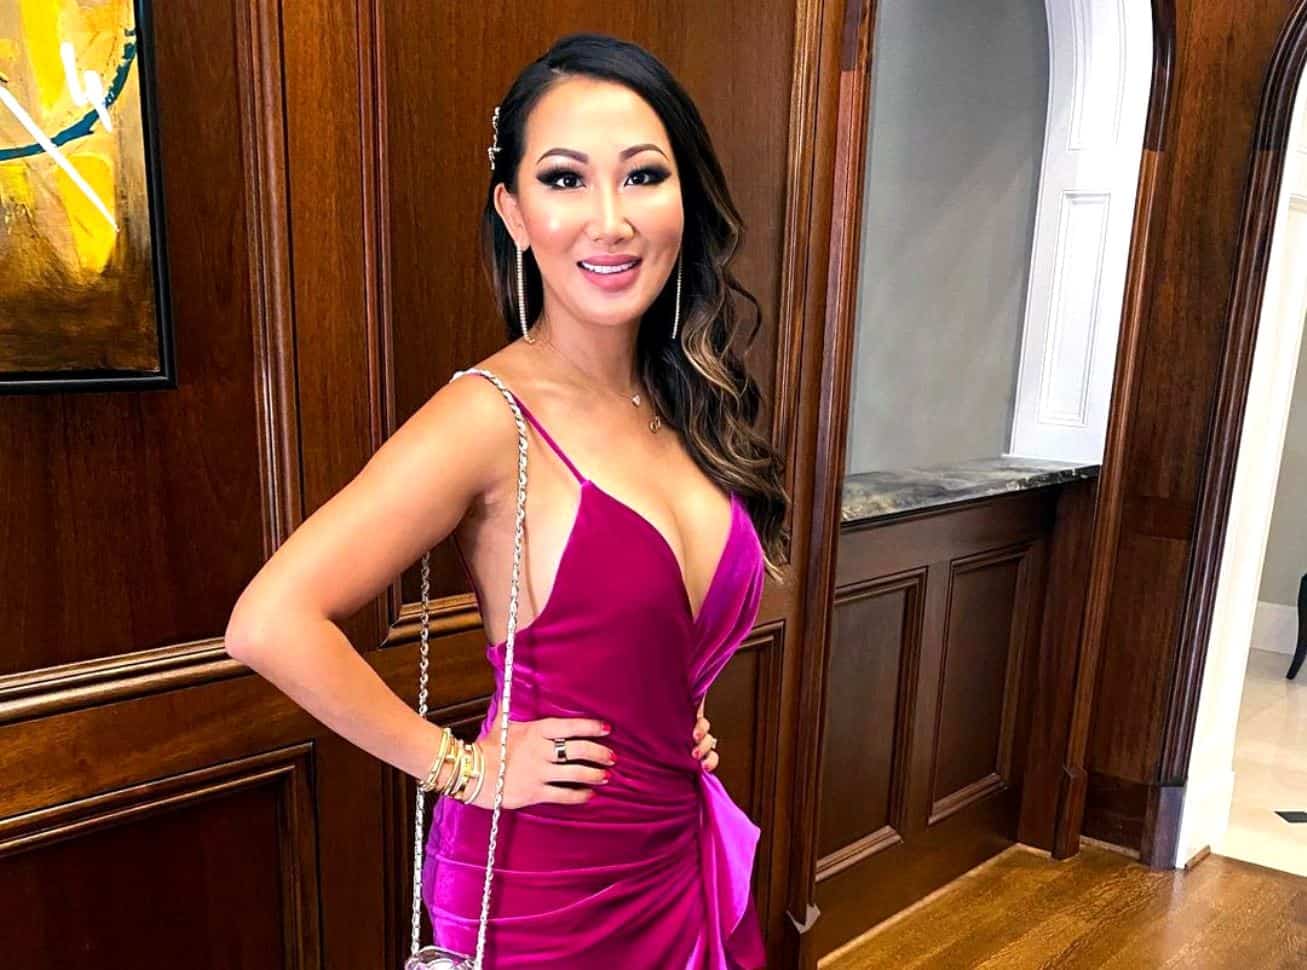  Dr. Tiffany Moon Reveals Her Biggest Regret of RHOD, Recalls Being "Picked On" by Cast, and Admits Husband Daniel is Camera-Shy, Plus What Surprised Her Most About Debut Season